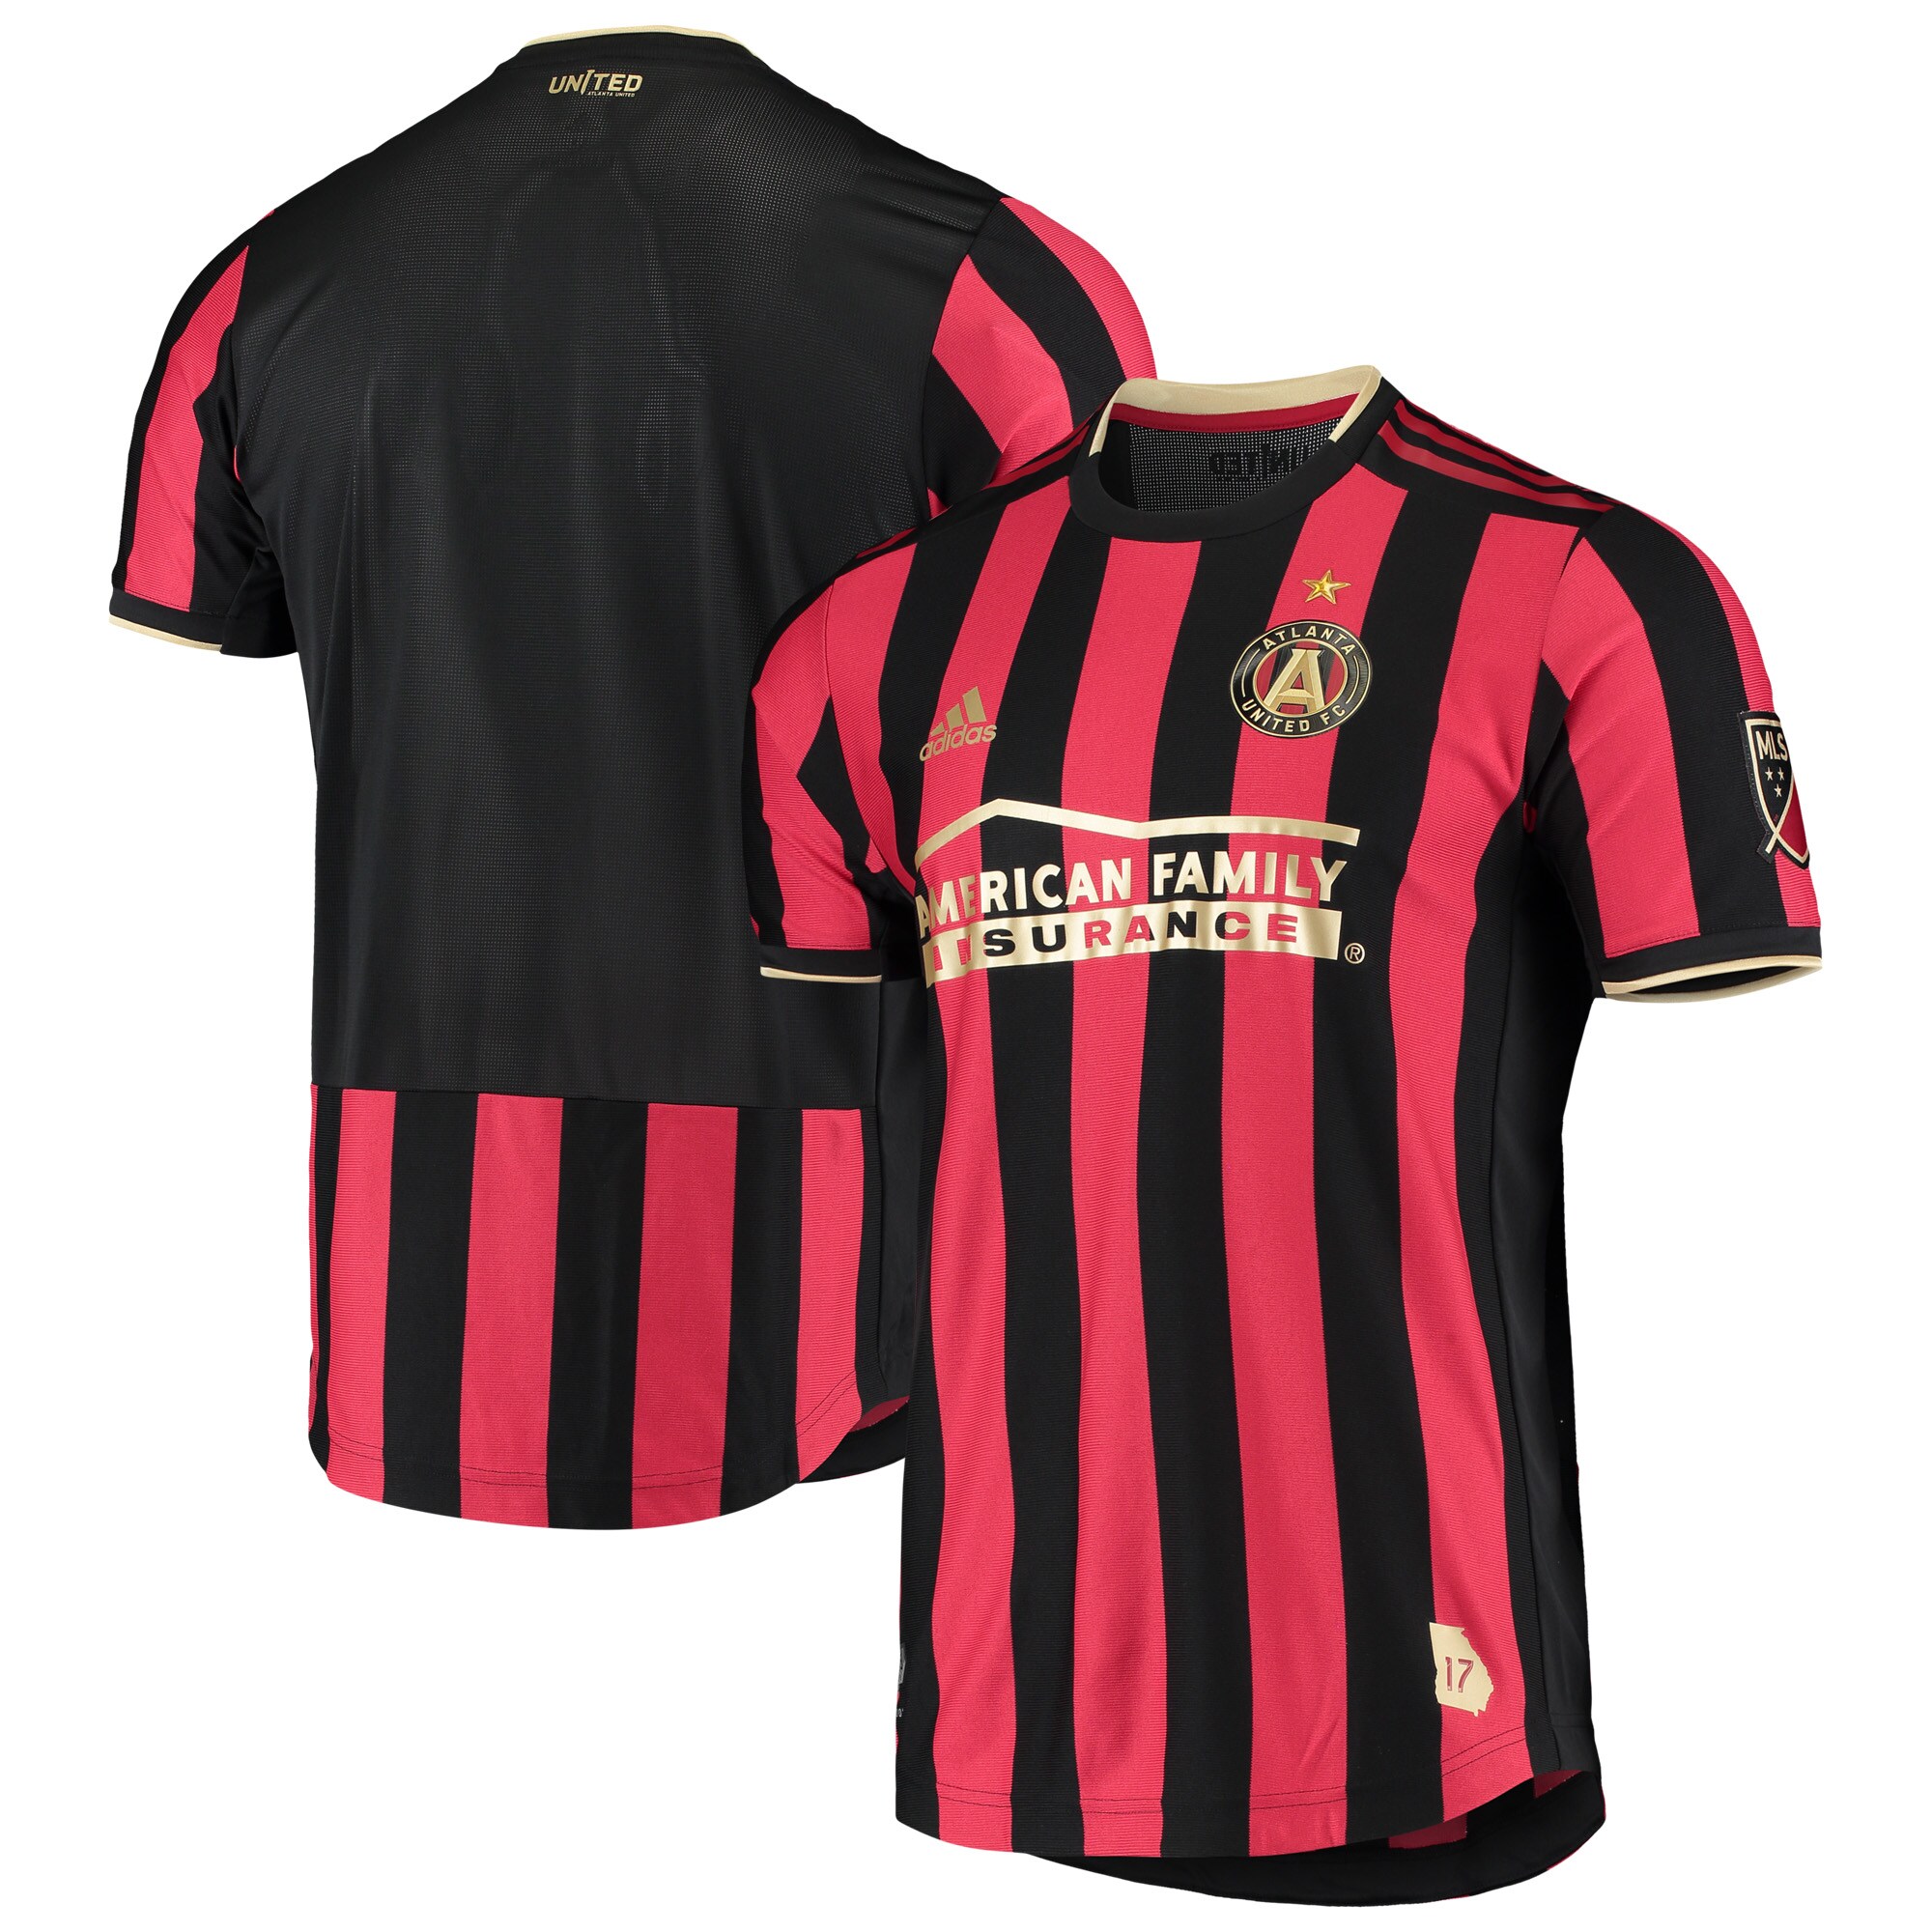 Men's Atlanta United FC Jerseys Red/Black 2019 Authentic Home Style